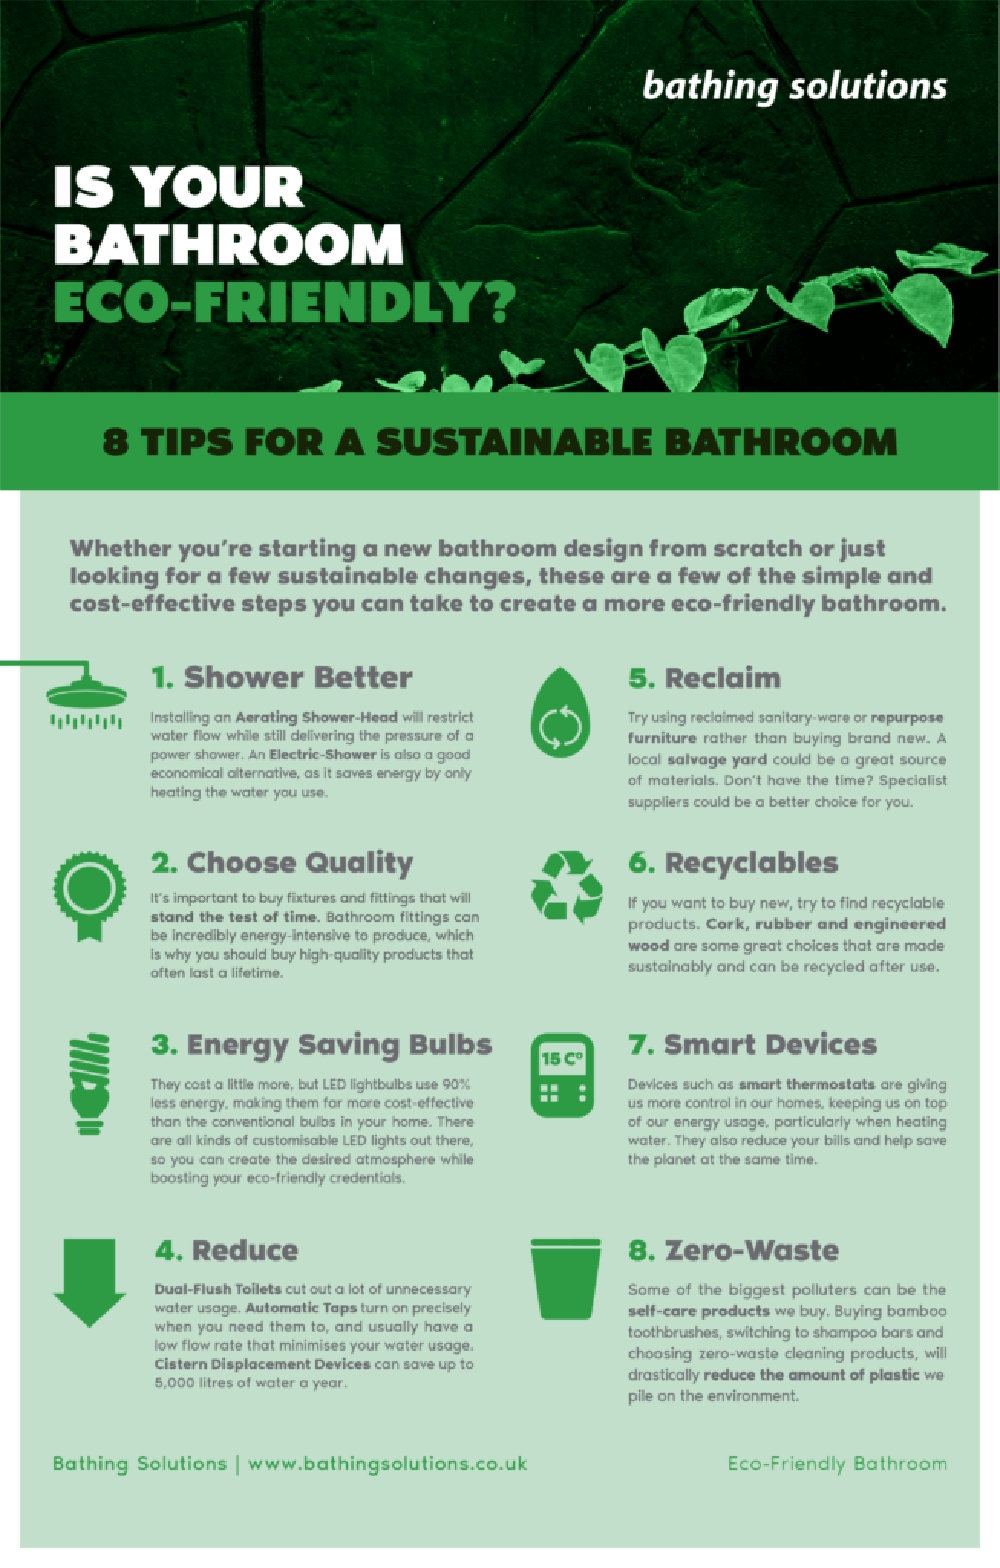 Is Your Bathroom Eco-Friendly? Tips for a Sustainable Bathroom